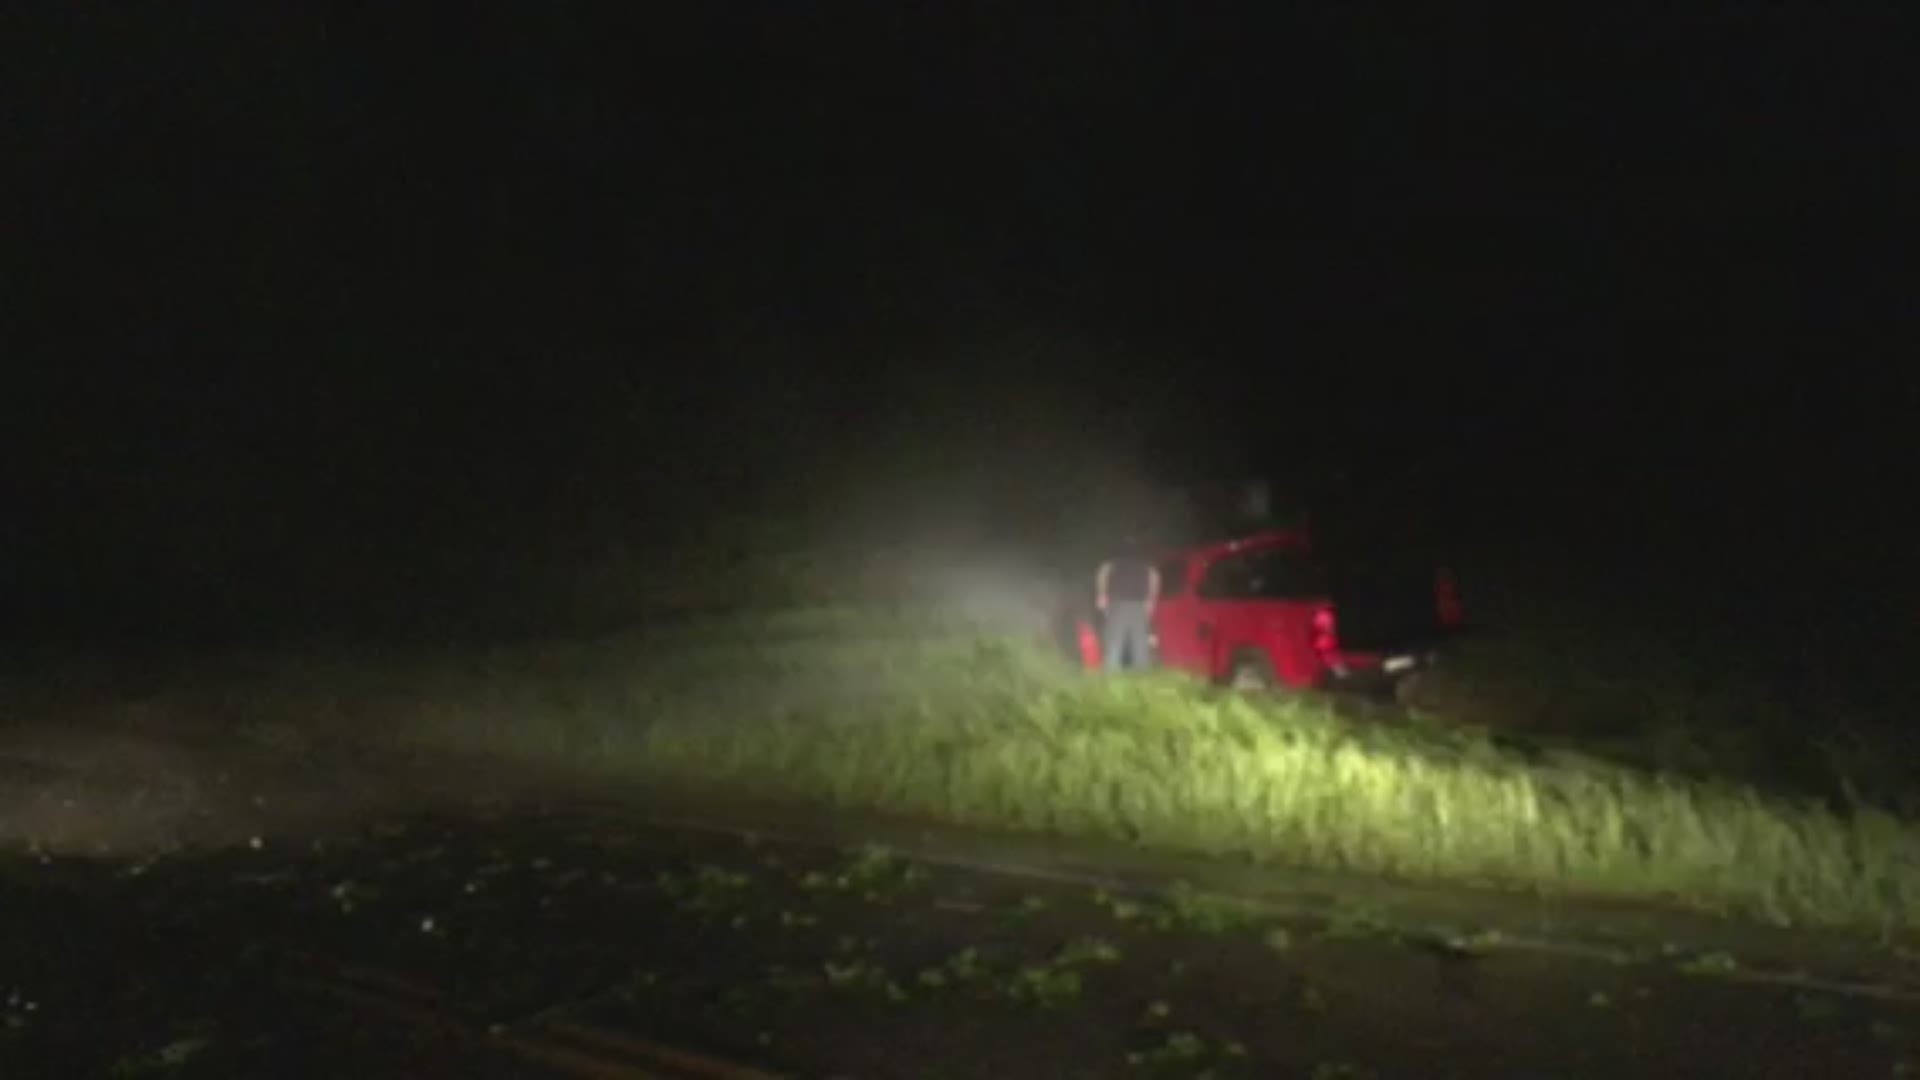 A downed tree caused a pickup truck to crash on Spur 362 in Tyler after severe storms slammed the area